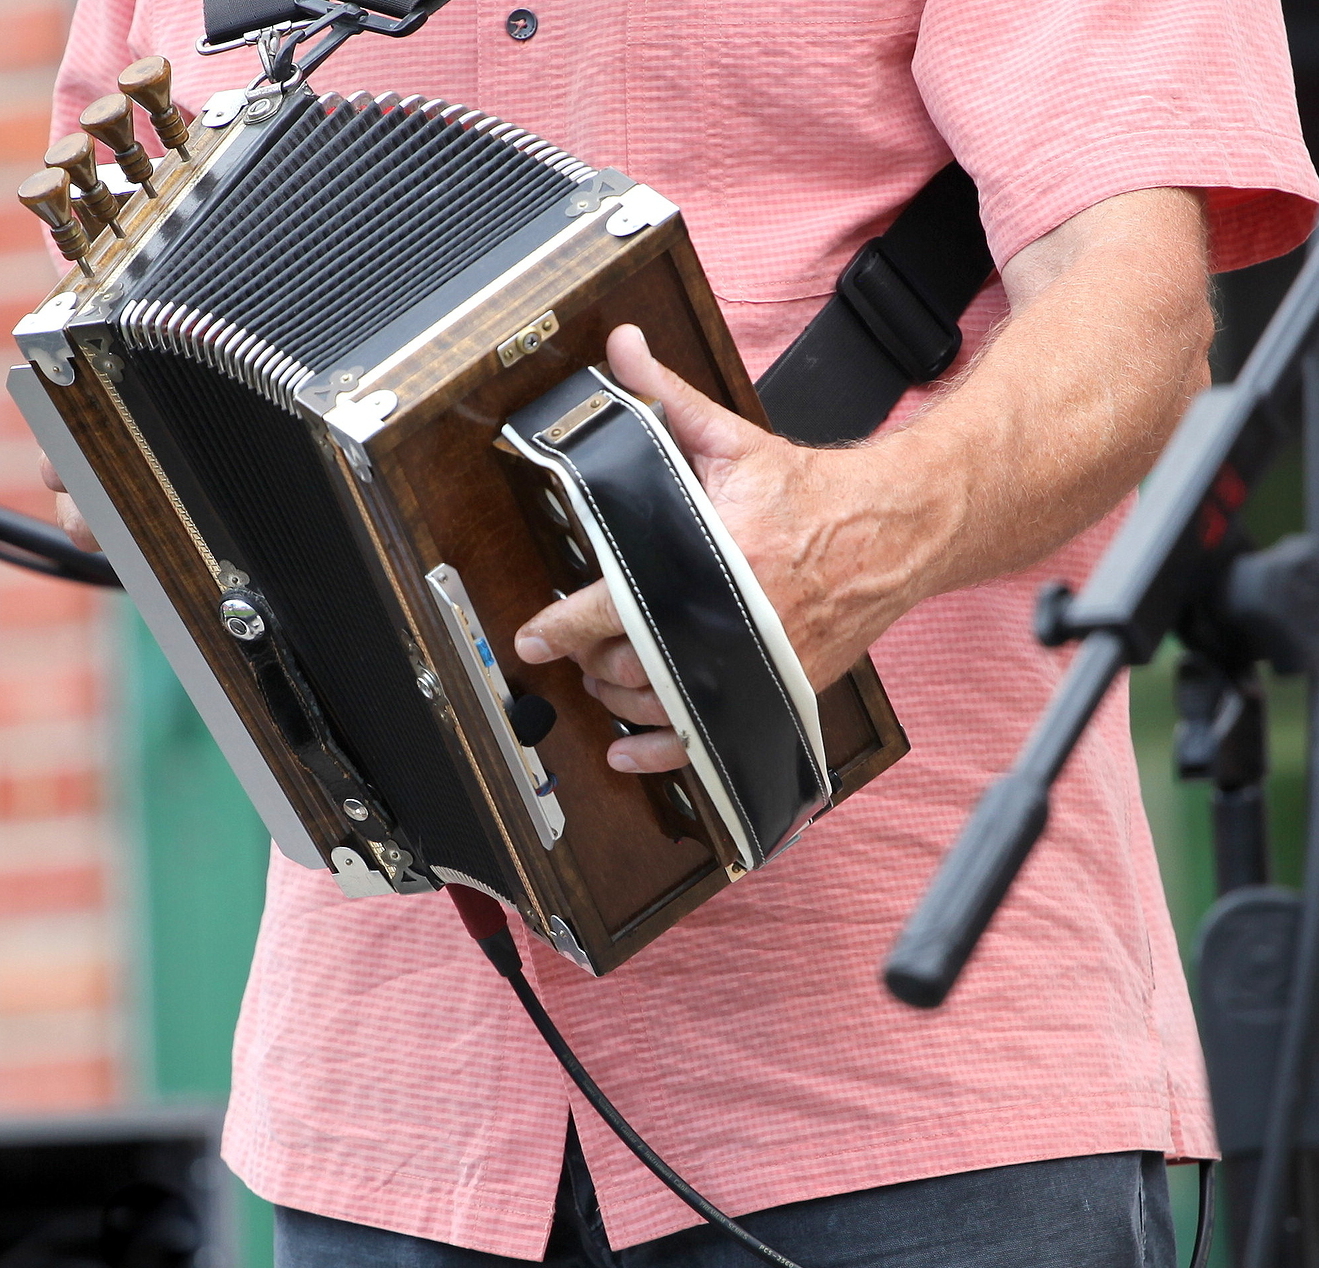 Zydeco accordion musician performing at a cajun music festival outdoors.